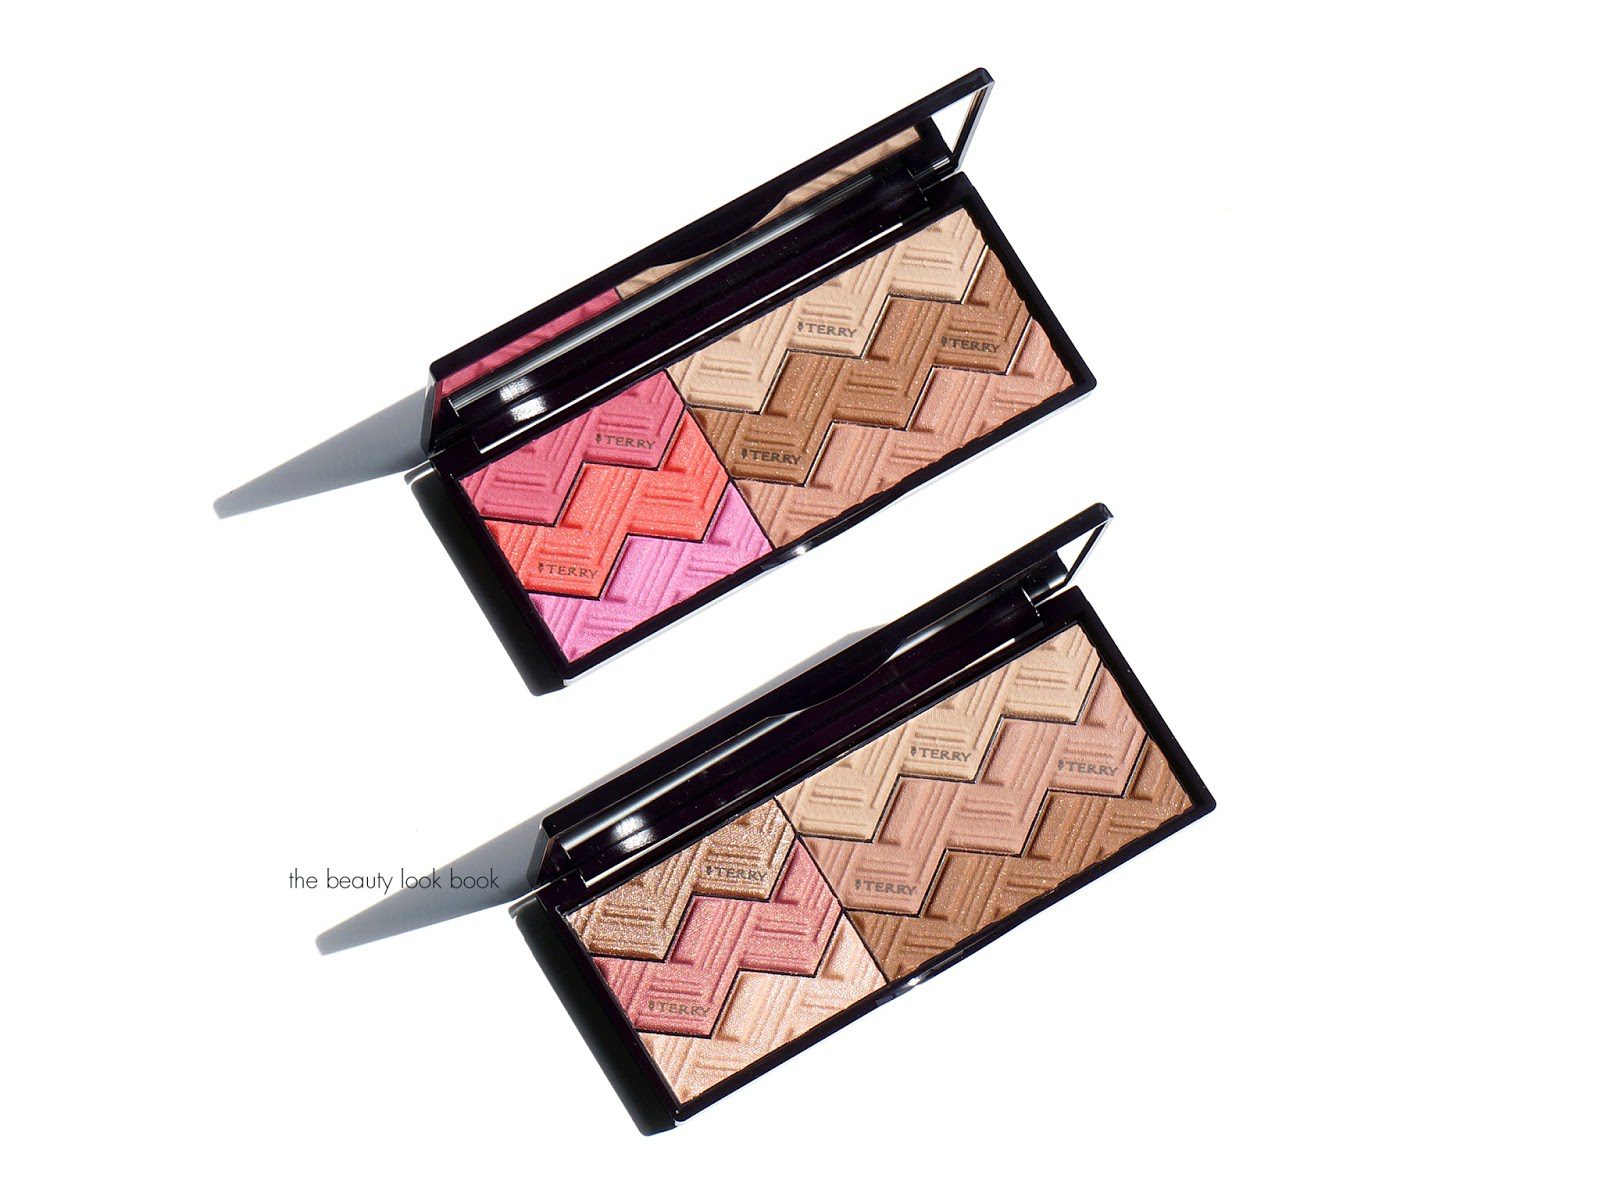 By Terru Sun Designer Palettes review via The Beauty Look Book